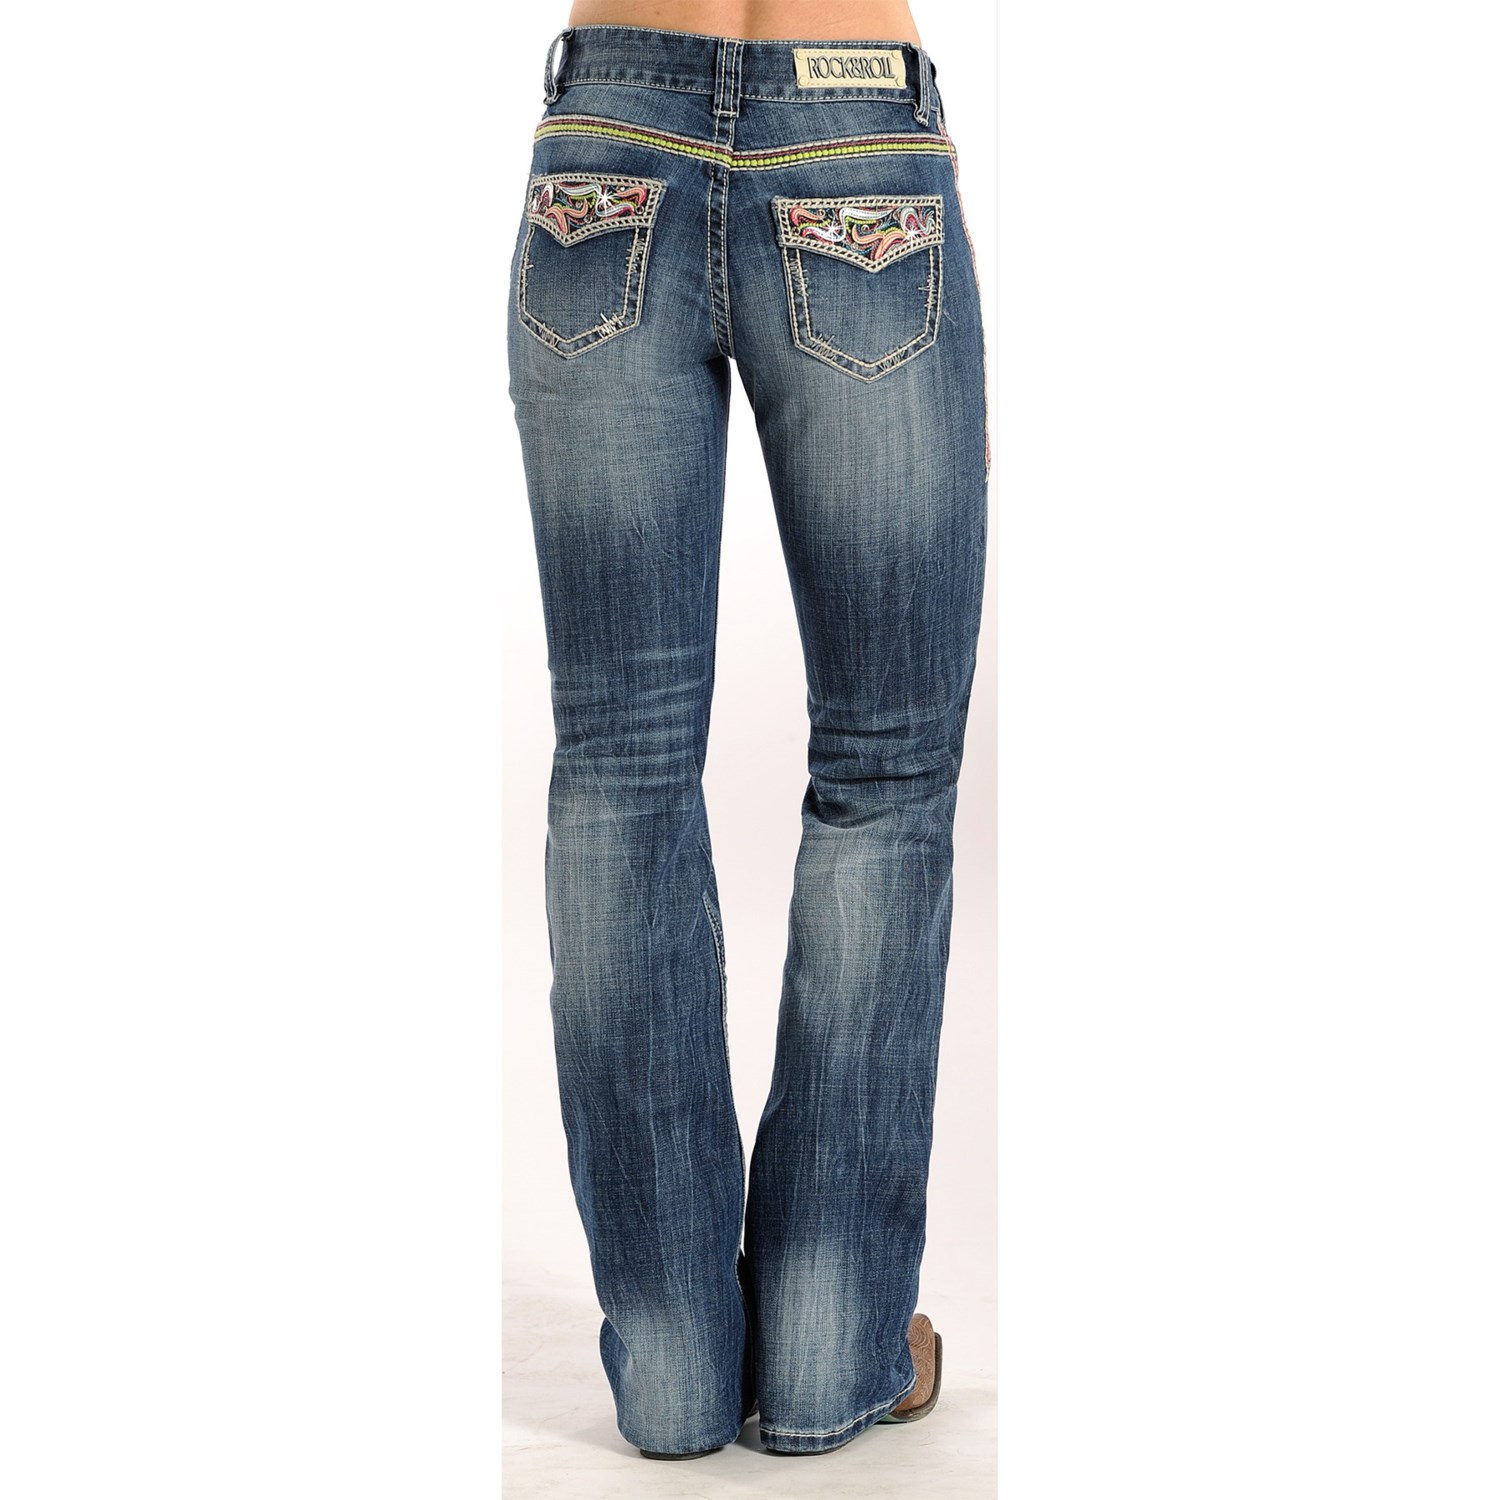 Rock & Roll Cowgirl Abstract Embroidered Jeans (For Women) - Save 55%